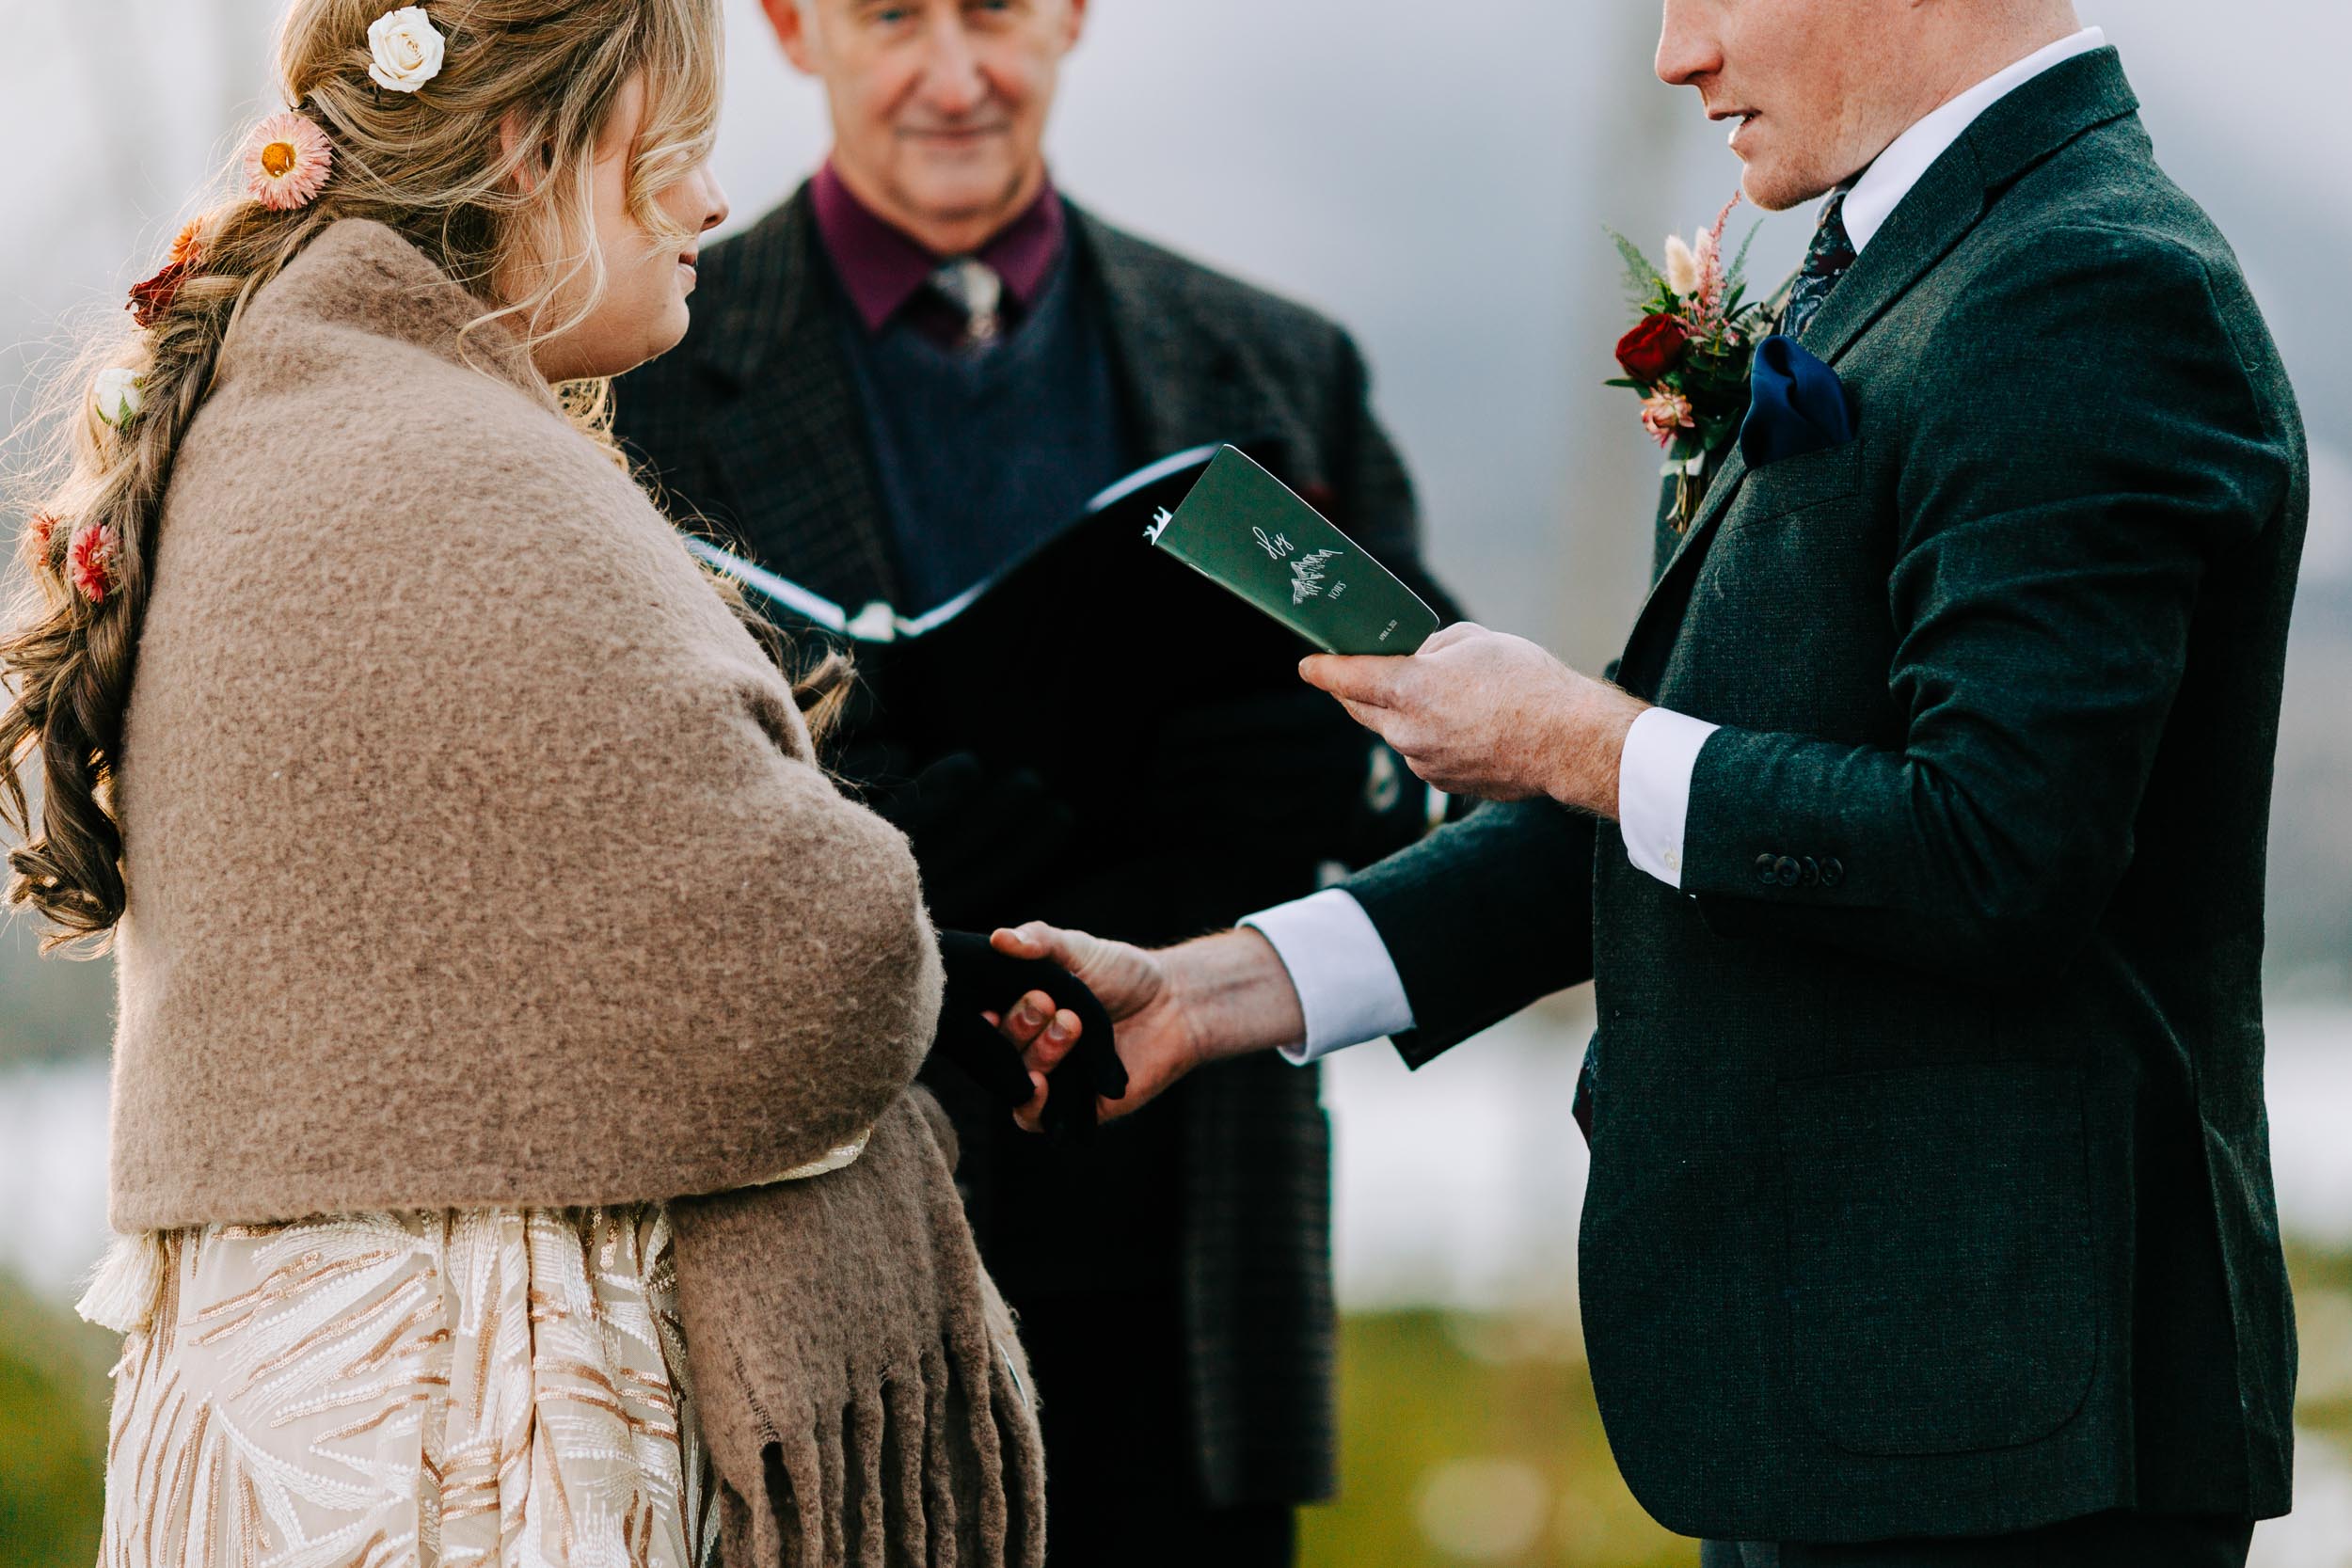 reading vows at elopement